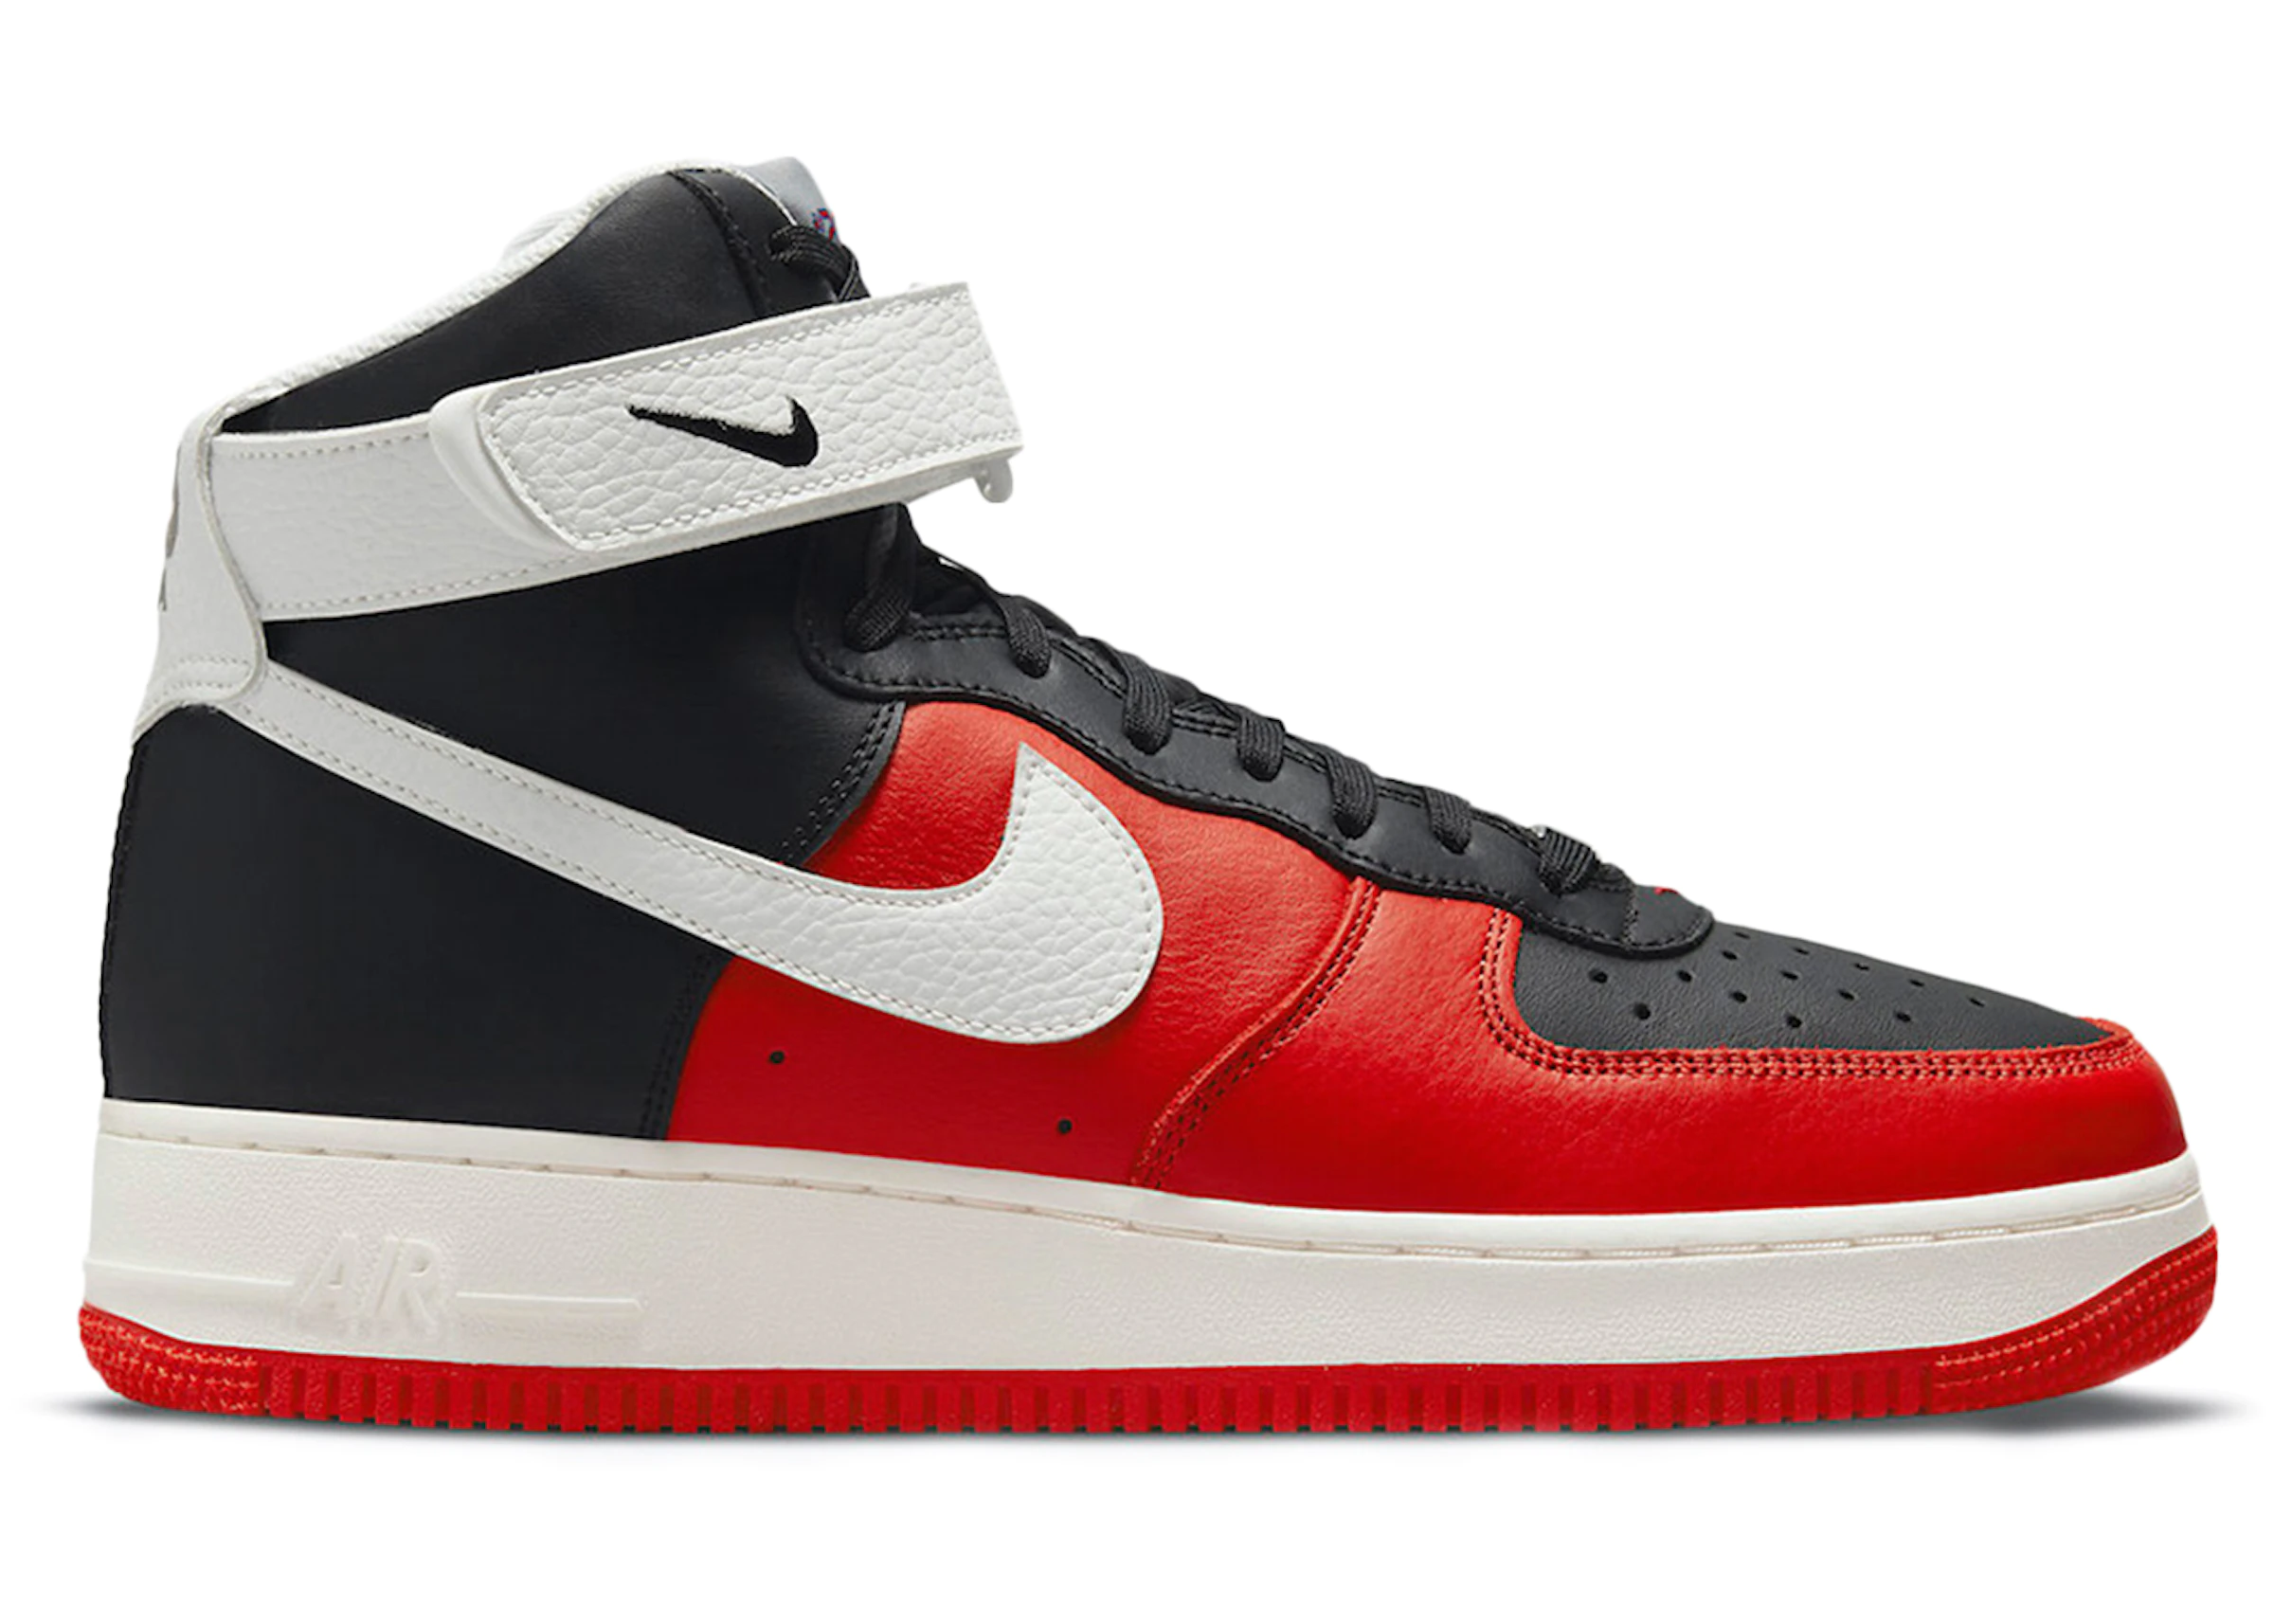 Taiko buik Onderscheppen reservering Nike Air Force 1 High '07 LV8 NBA 75th Anniversary Chile Red - DC8870-001 -  US